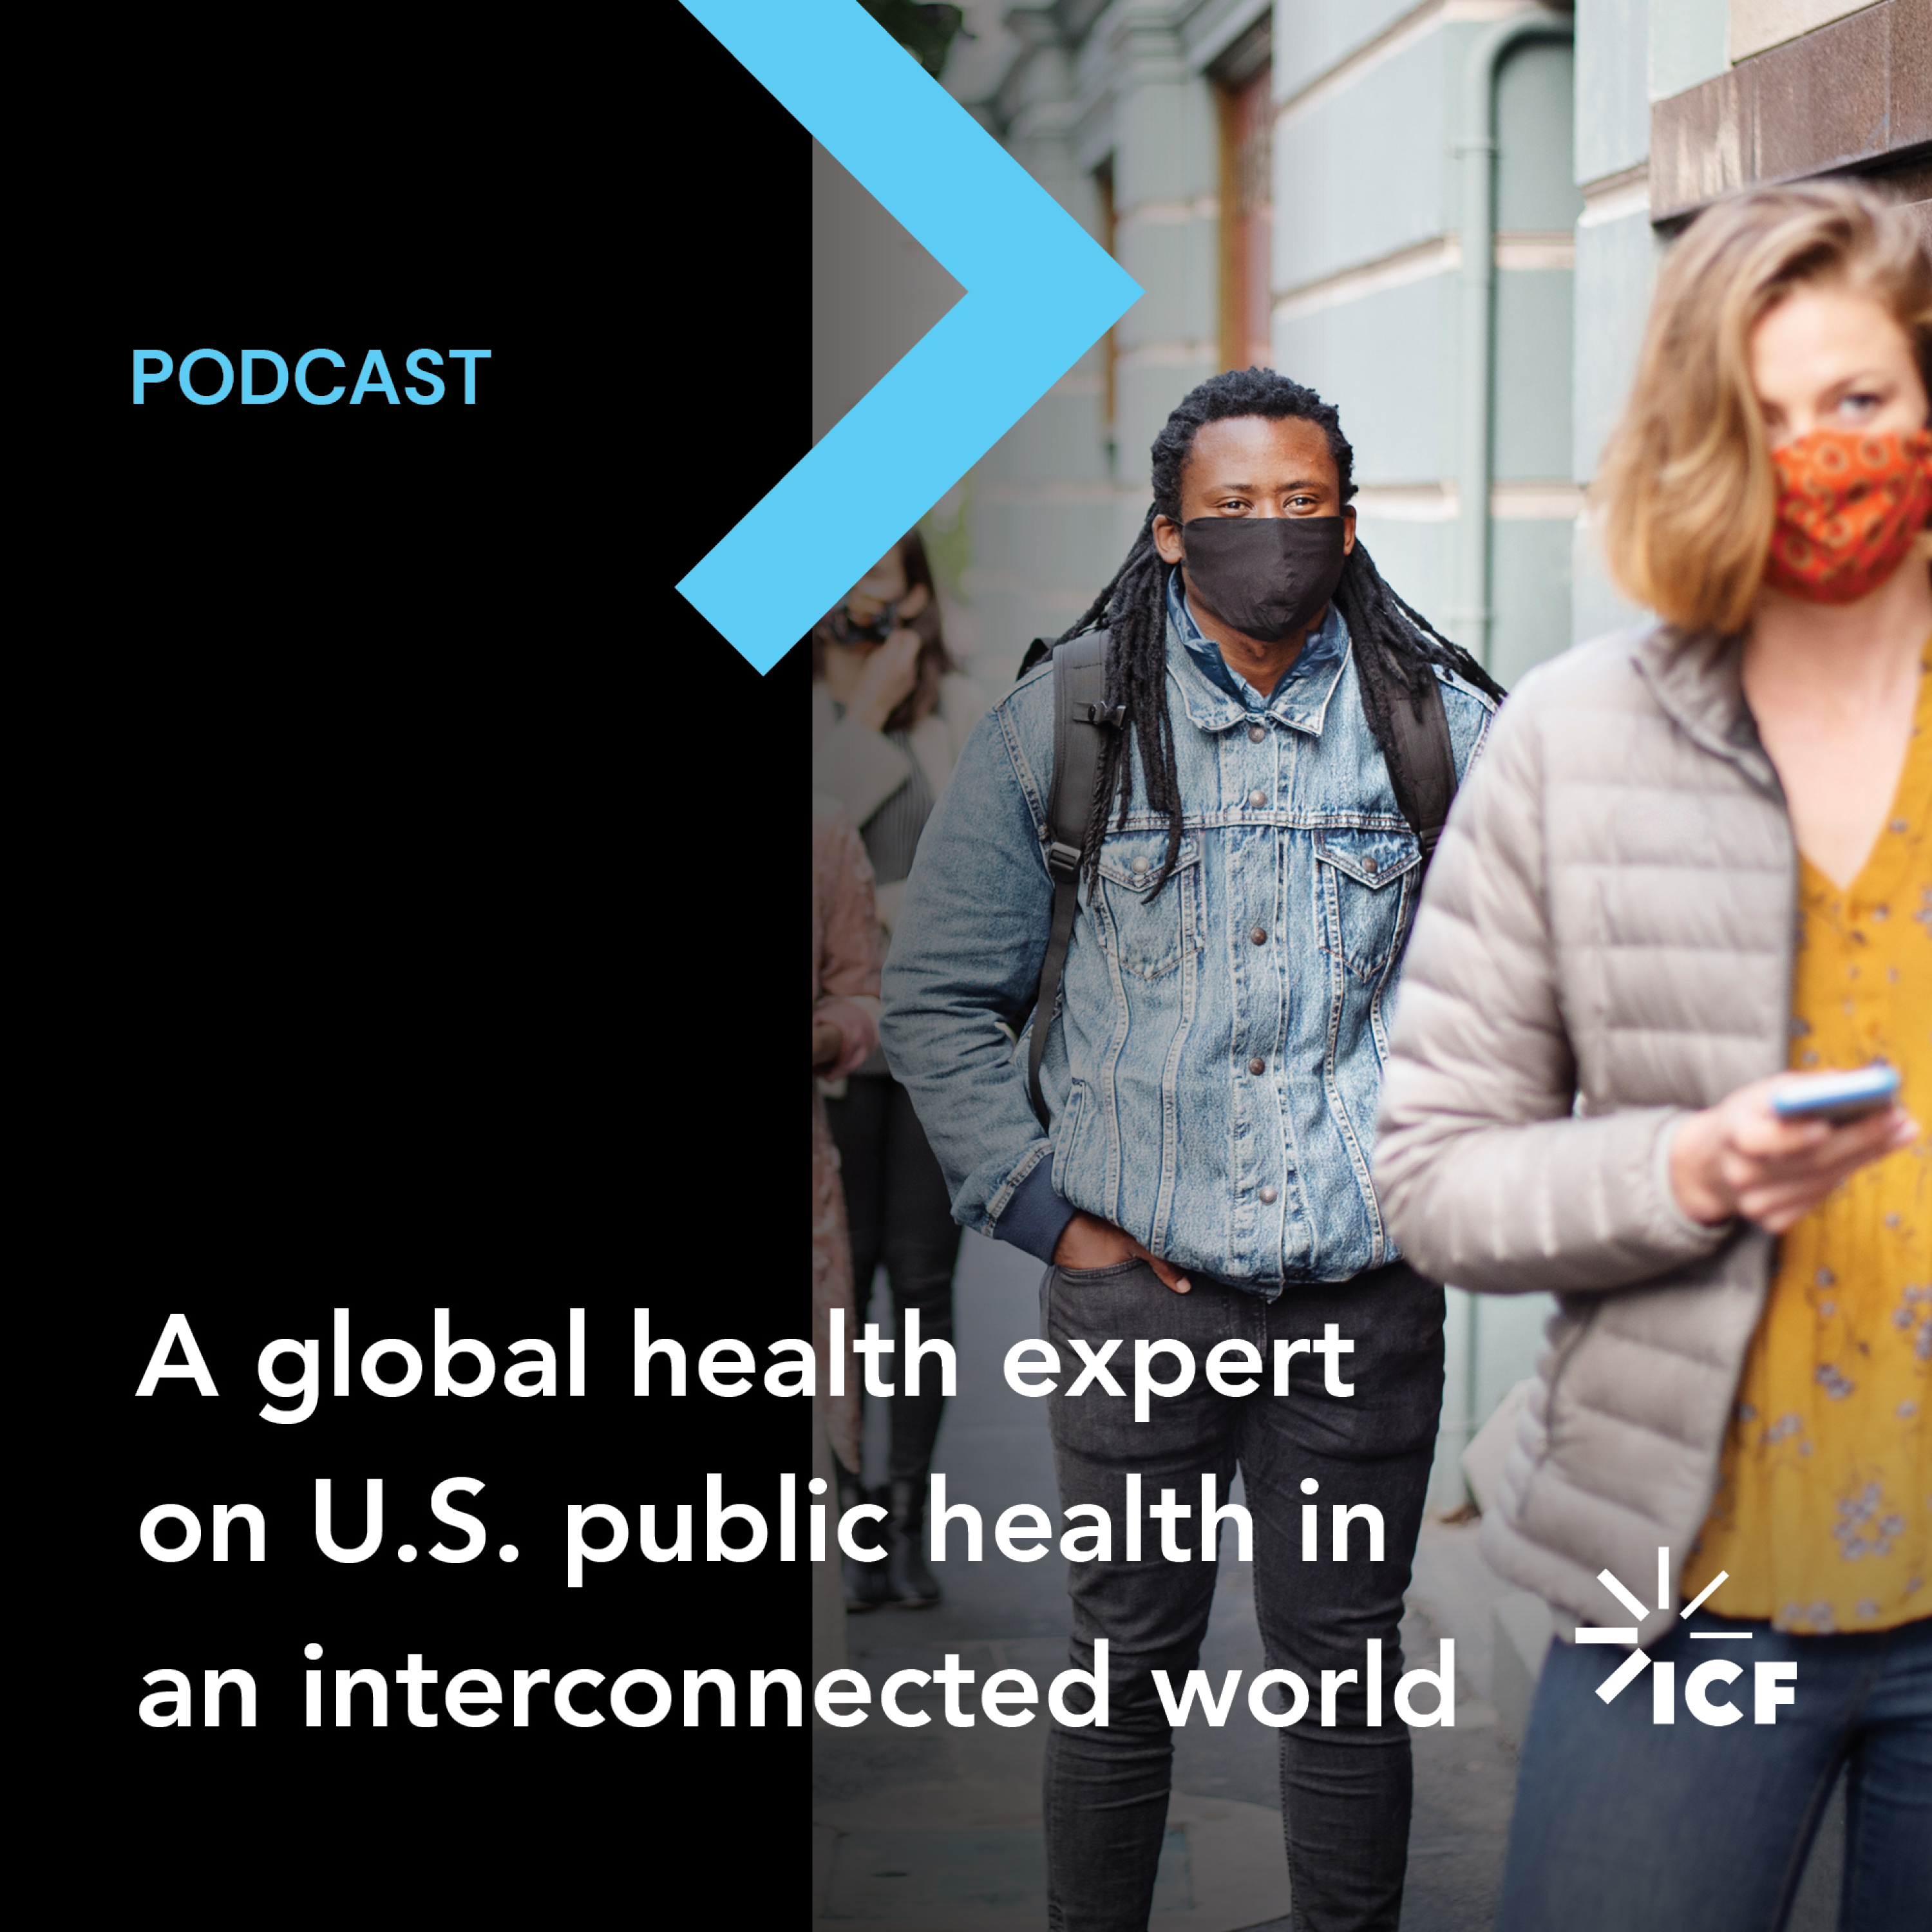 A global health expert on U.S. public health in an interconnected world